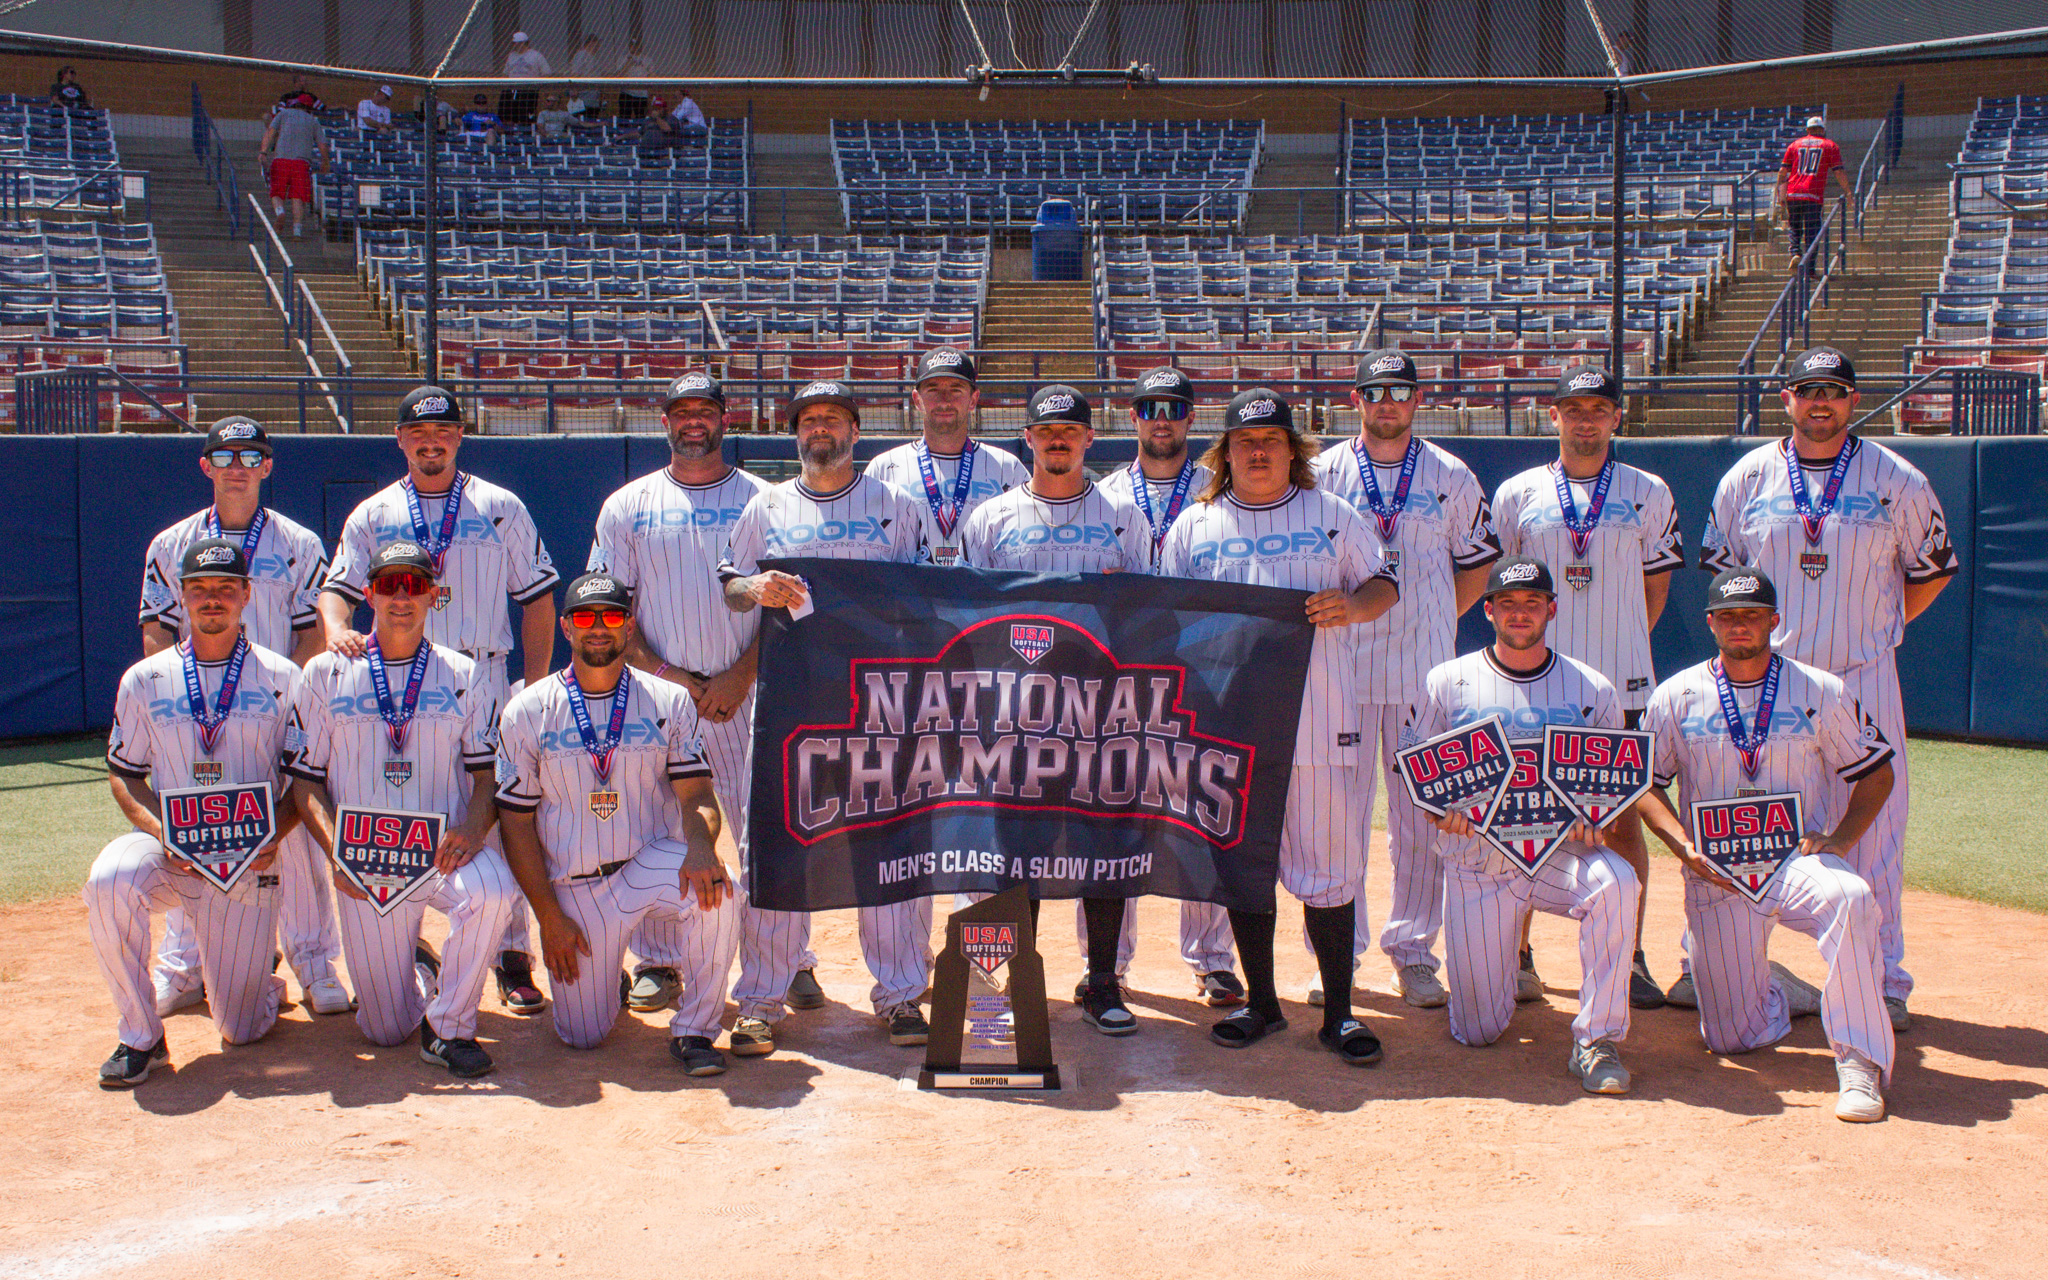 Men’s Class A Slow Pitch National Championship title claimed as Labor Day weekend caps 2023 event season at the Softball Capital of the World® featured image